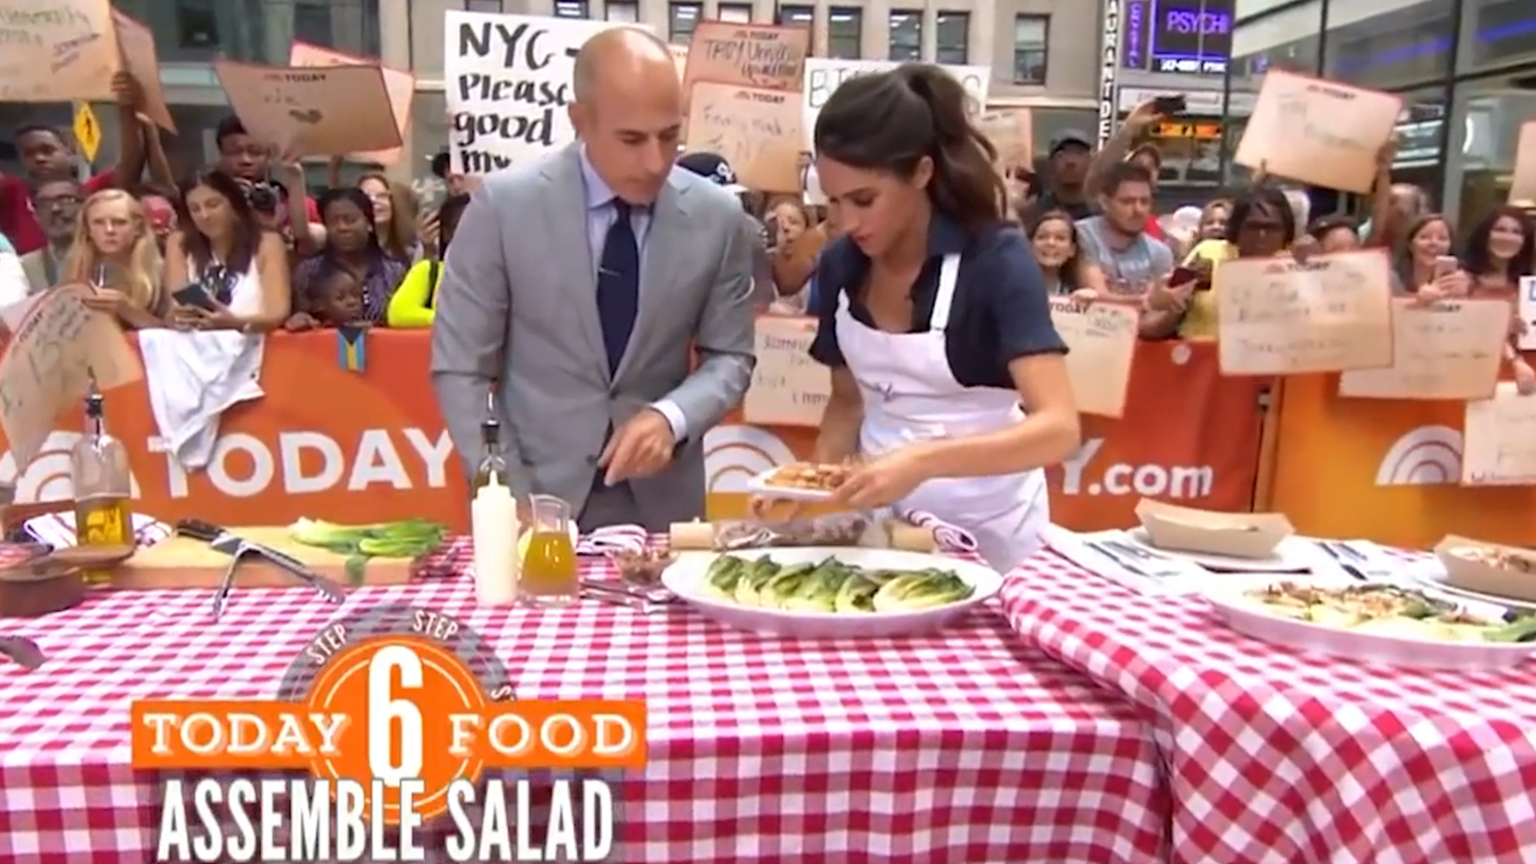 Meghan Markle cooks a delicious meal on the Today show